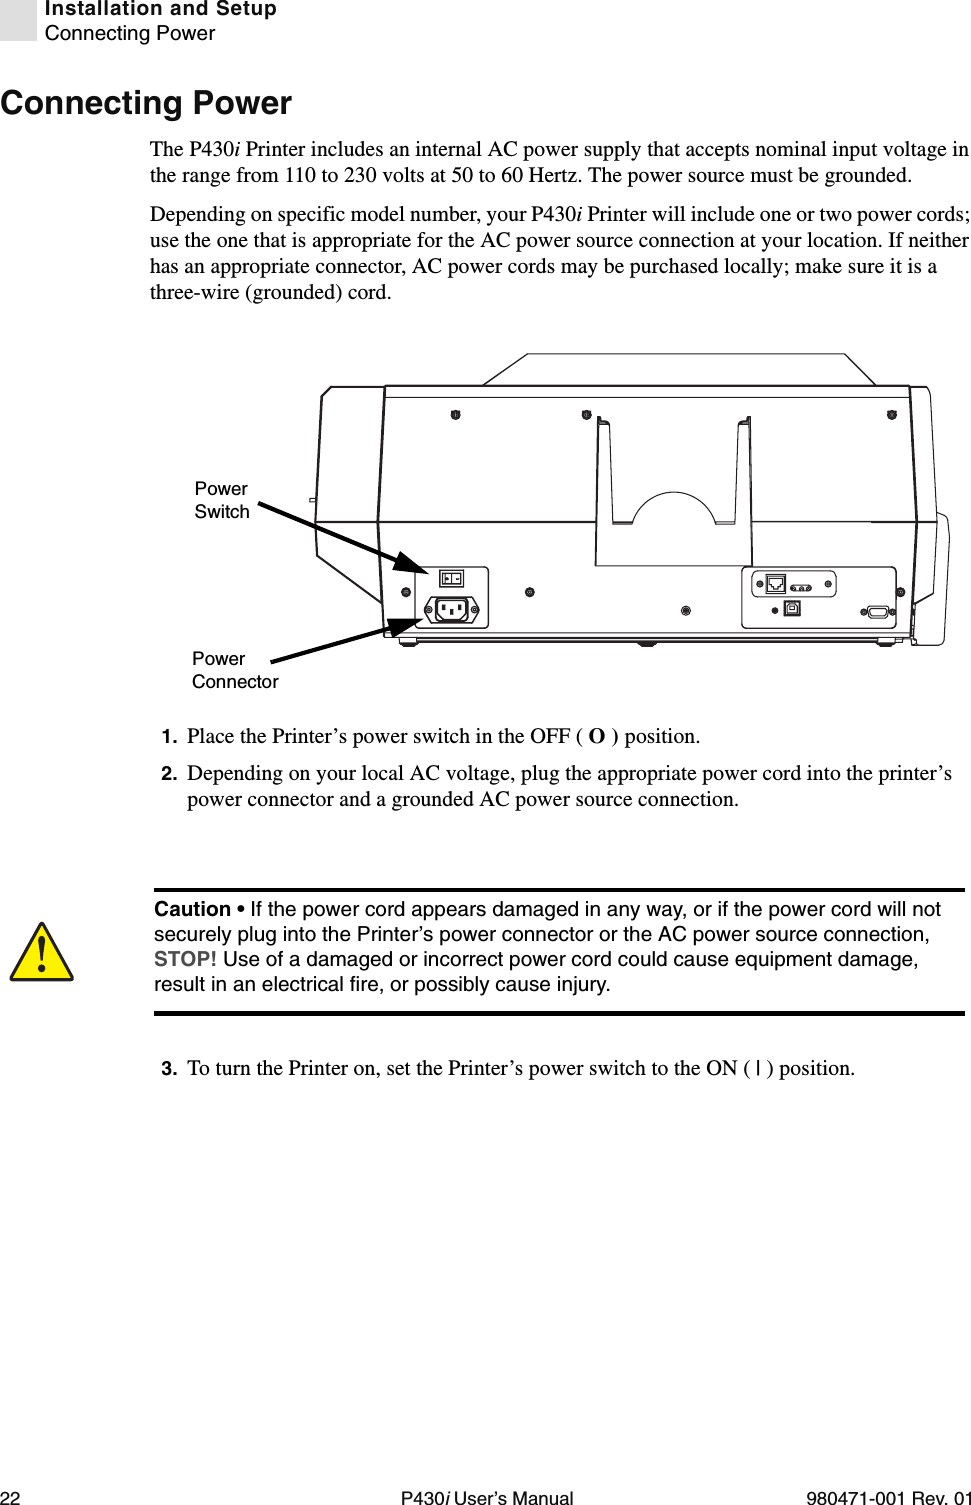 22 P430i User’s Manual 980471-001 Rev. 01Installation and SetupConnecting PowerConnecting PowerThe P430i Printer includes an internal AC power supply that accepts nominal input voltage in the range from 110 to 230 volts at 50 to 60 Hertz. The power source must be grounded.Depending on specific model number, your P430i Printer will include one or two power cords; use the one that is appropriate for the AC power source connection at your location. If neither has an appropriate connector, AC power cords may be purchased locally; make sure it is a three-wire (grounded) cord.1. Place the Printer’s power switch in the OFF ( O ) position.2. Depending on your local AC voltage, plug the appropriate power cord into the printer’s power connector and a grounded AC power source connection.3. To turn the Printer on, set the Printer’s power switch to the ON ( | ) position.Power ConnectorPower SwitchCaution • If the power cord appears damaged in any way, or if the power cord will not securely plug into the Printer’s power connector or the AC power source connection, STOP! Use of a damaged or incorrect power cord could cause equipment damage, result in an electrical fire, or possibly cause injury.